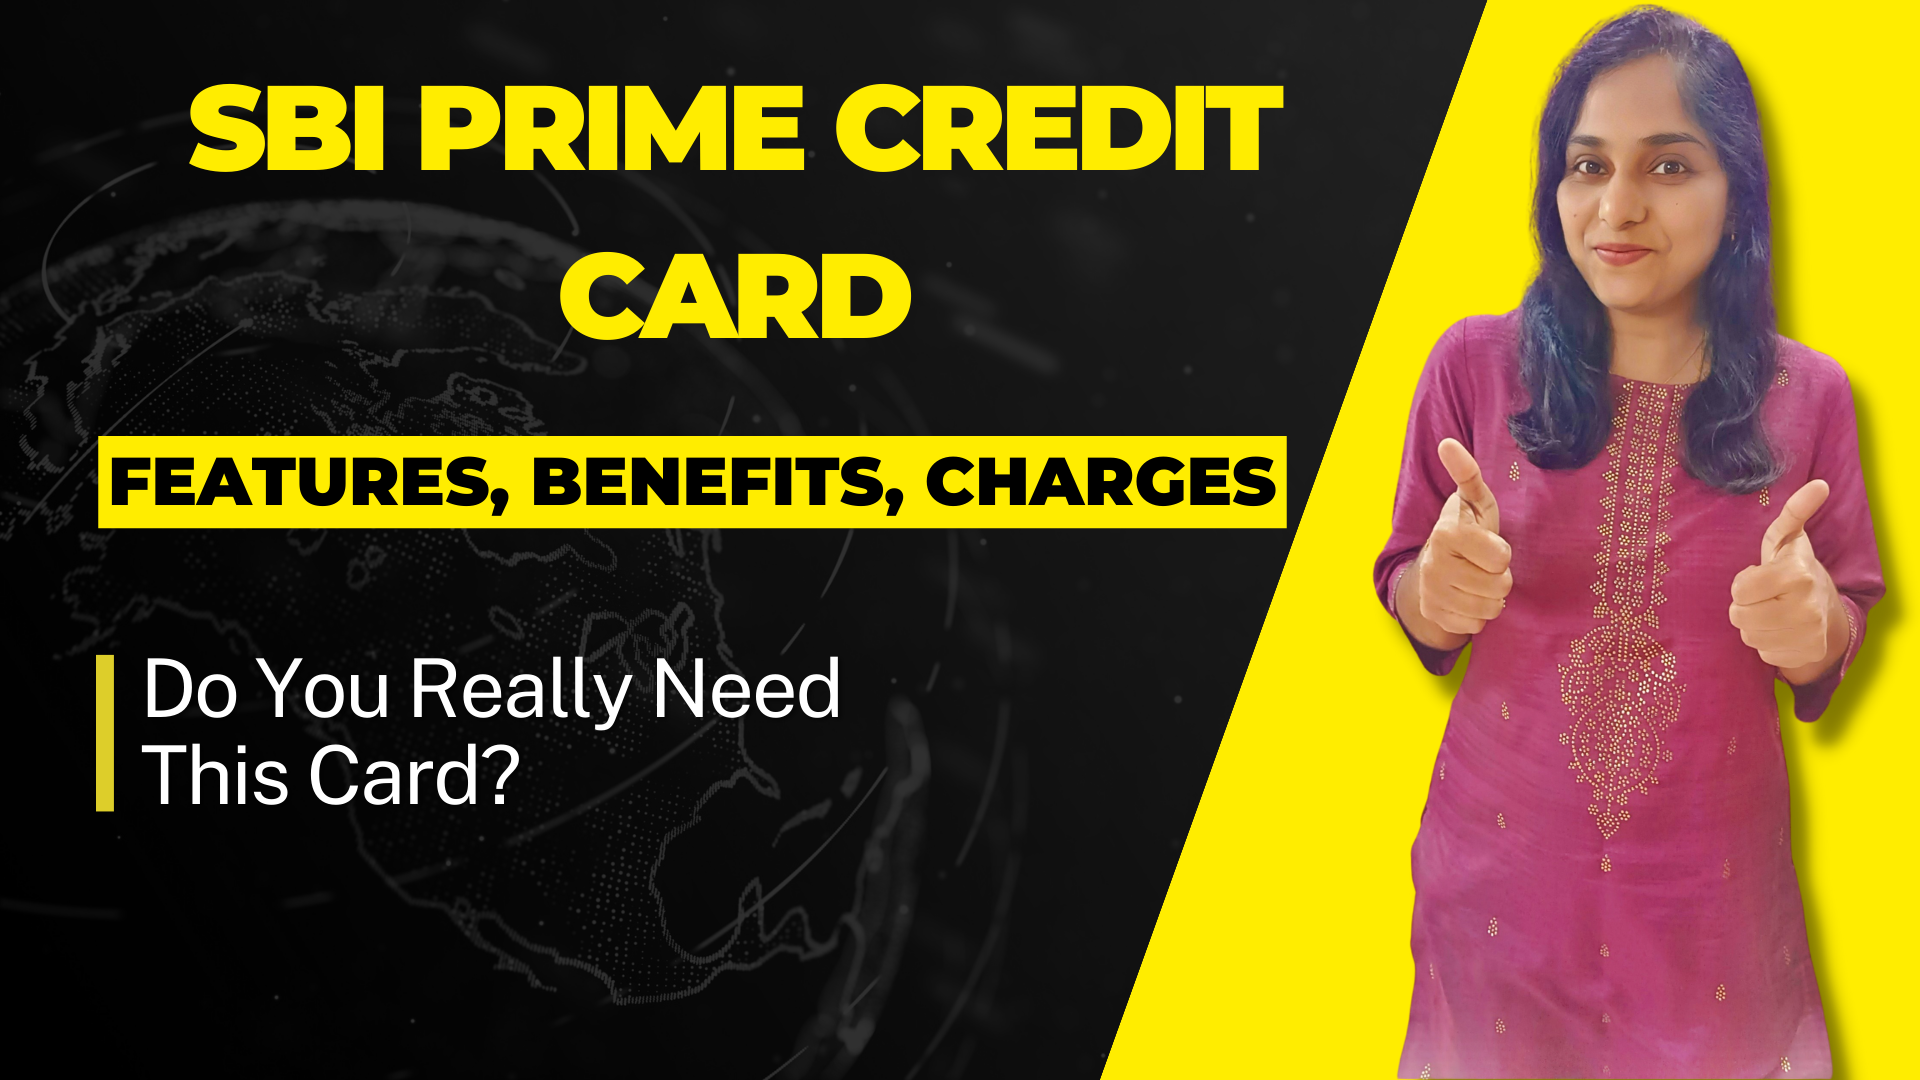 SBI Prime Credit Card | Features, Benefits, Charges | Do You Really Need This Card?